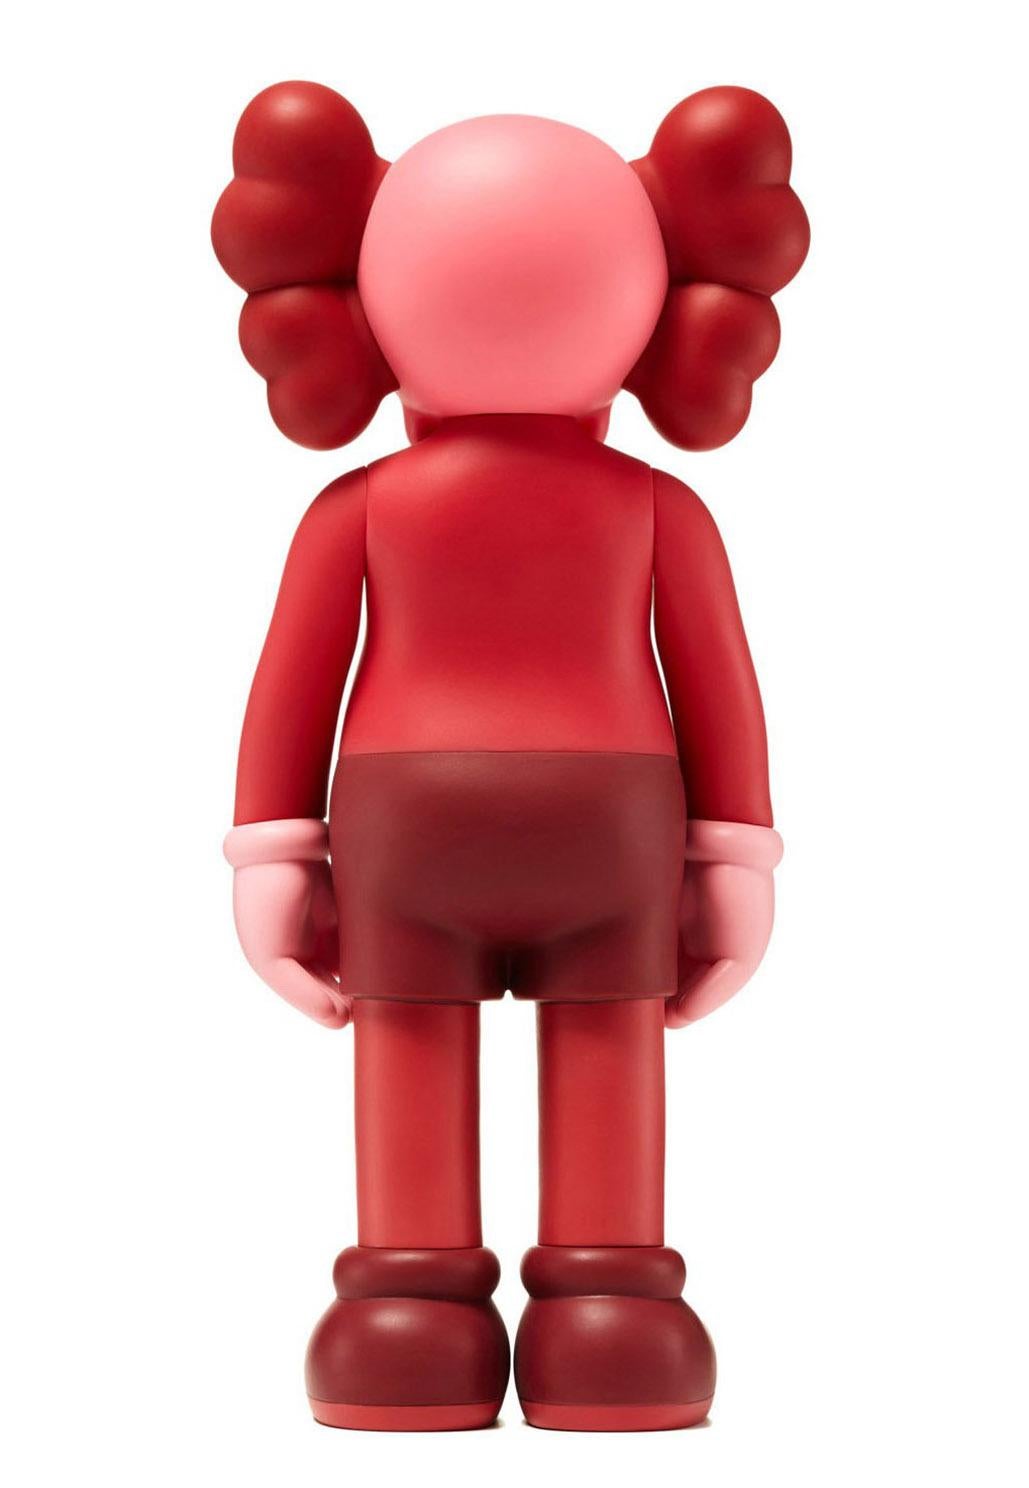 KAWS Red Blush Companions: complete set of 2 works: New and sealed in their original packaging. Published by Medicom Japan in conjunction with the exhibition, KAWS: Where The End Starts at the Modern Art Museum of Fort Worth. These figures have